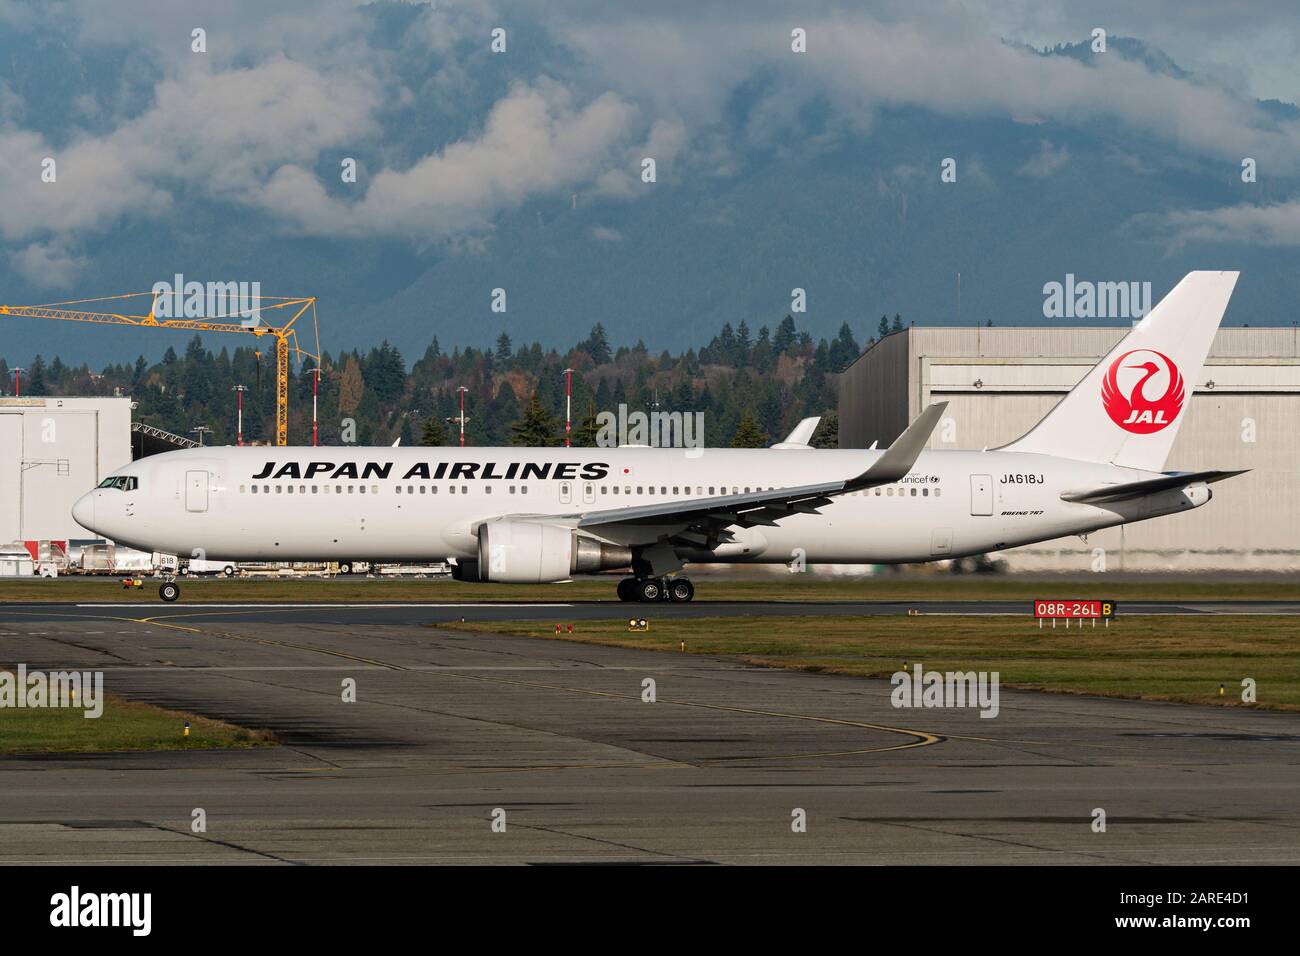 Japan Airlines JAL plane Boeing 767-300ER (767-346ER) twin-engine wide-body jet airliner takes off from Vancouver International Airport Stock Photo